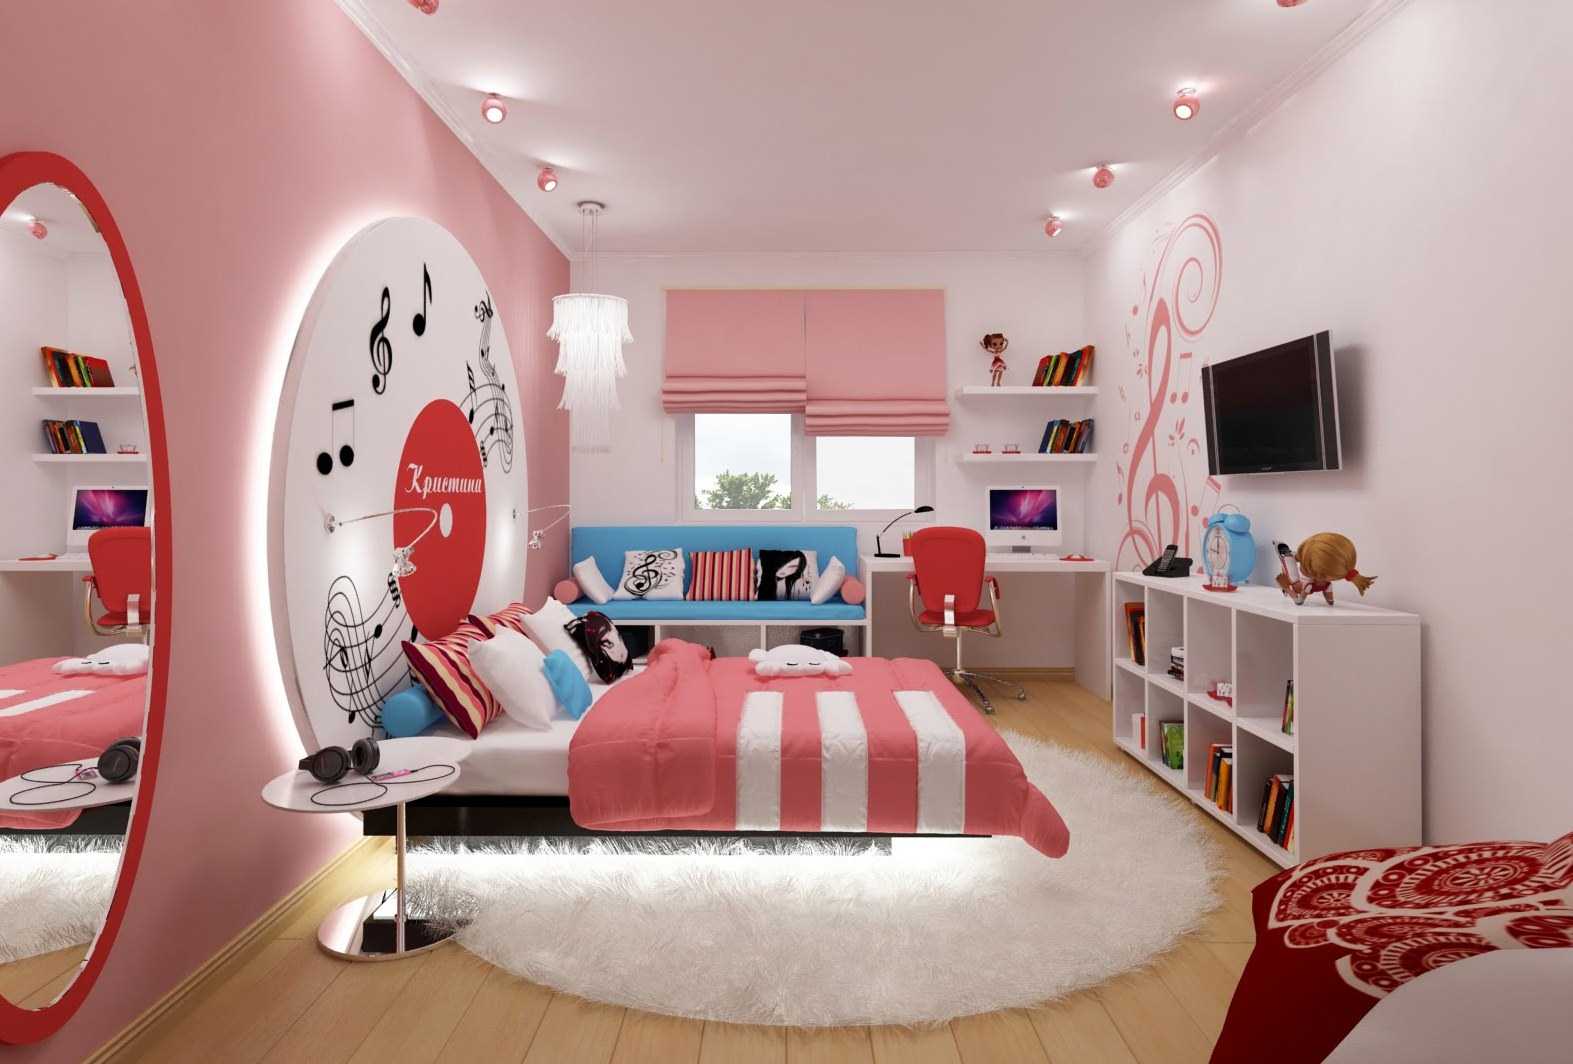 version of the original bedroom style for the girl